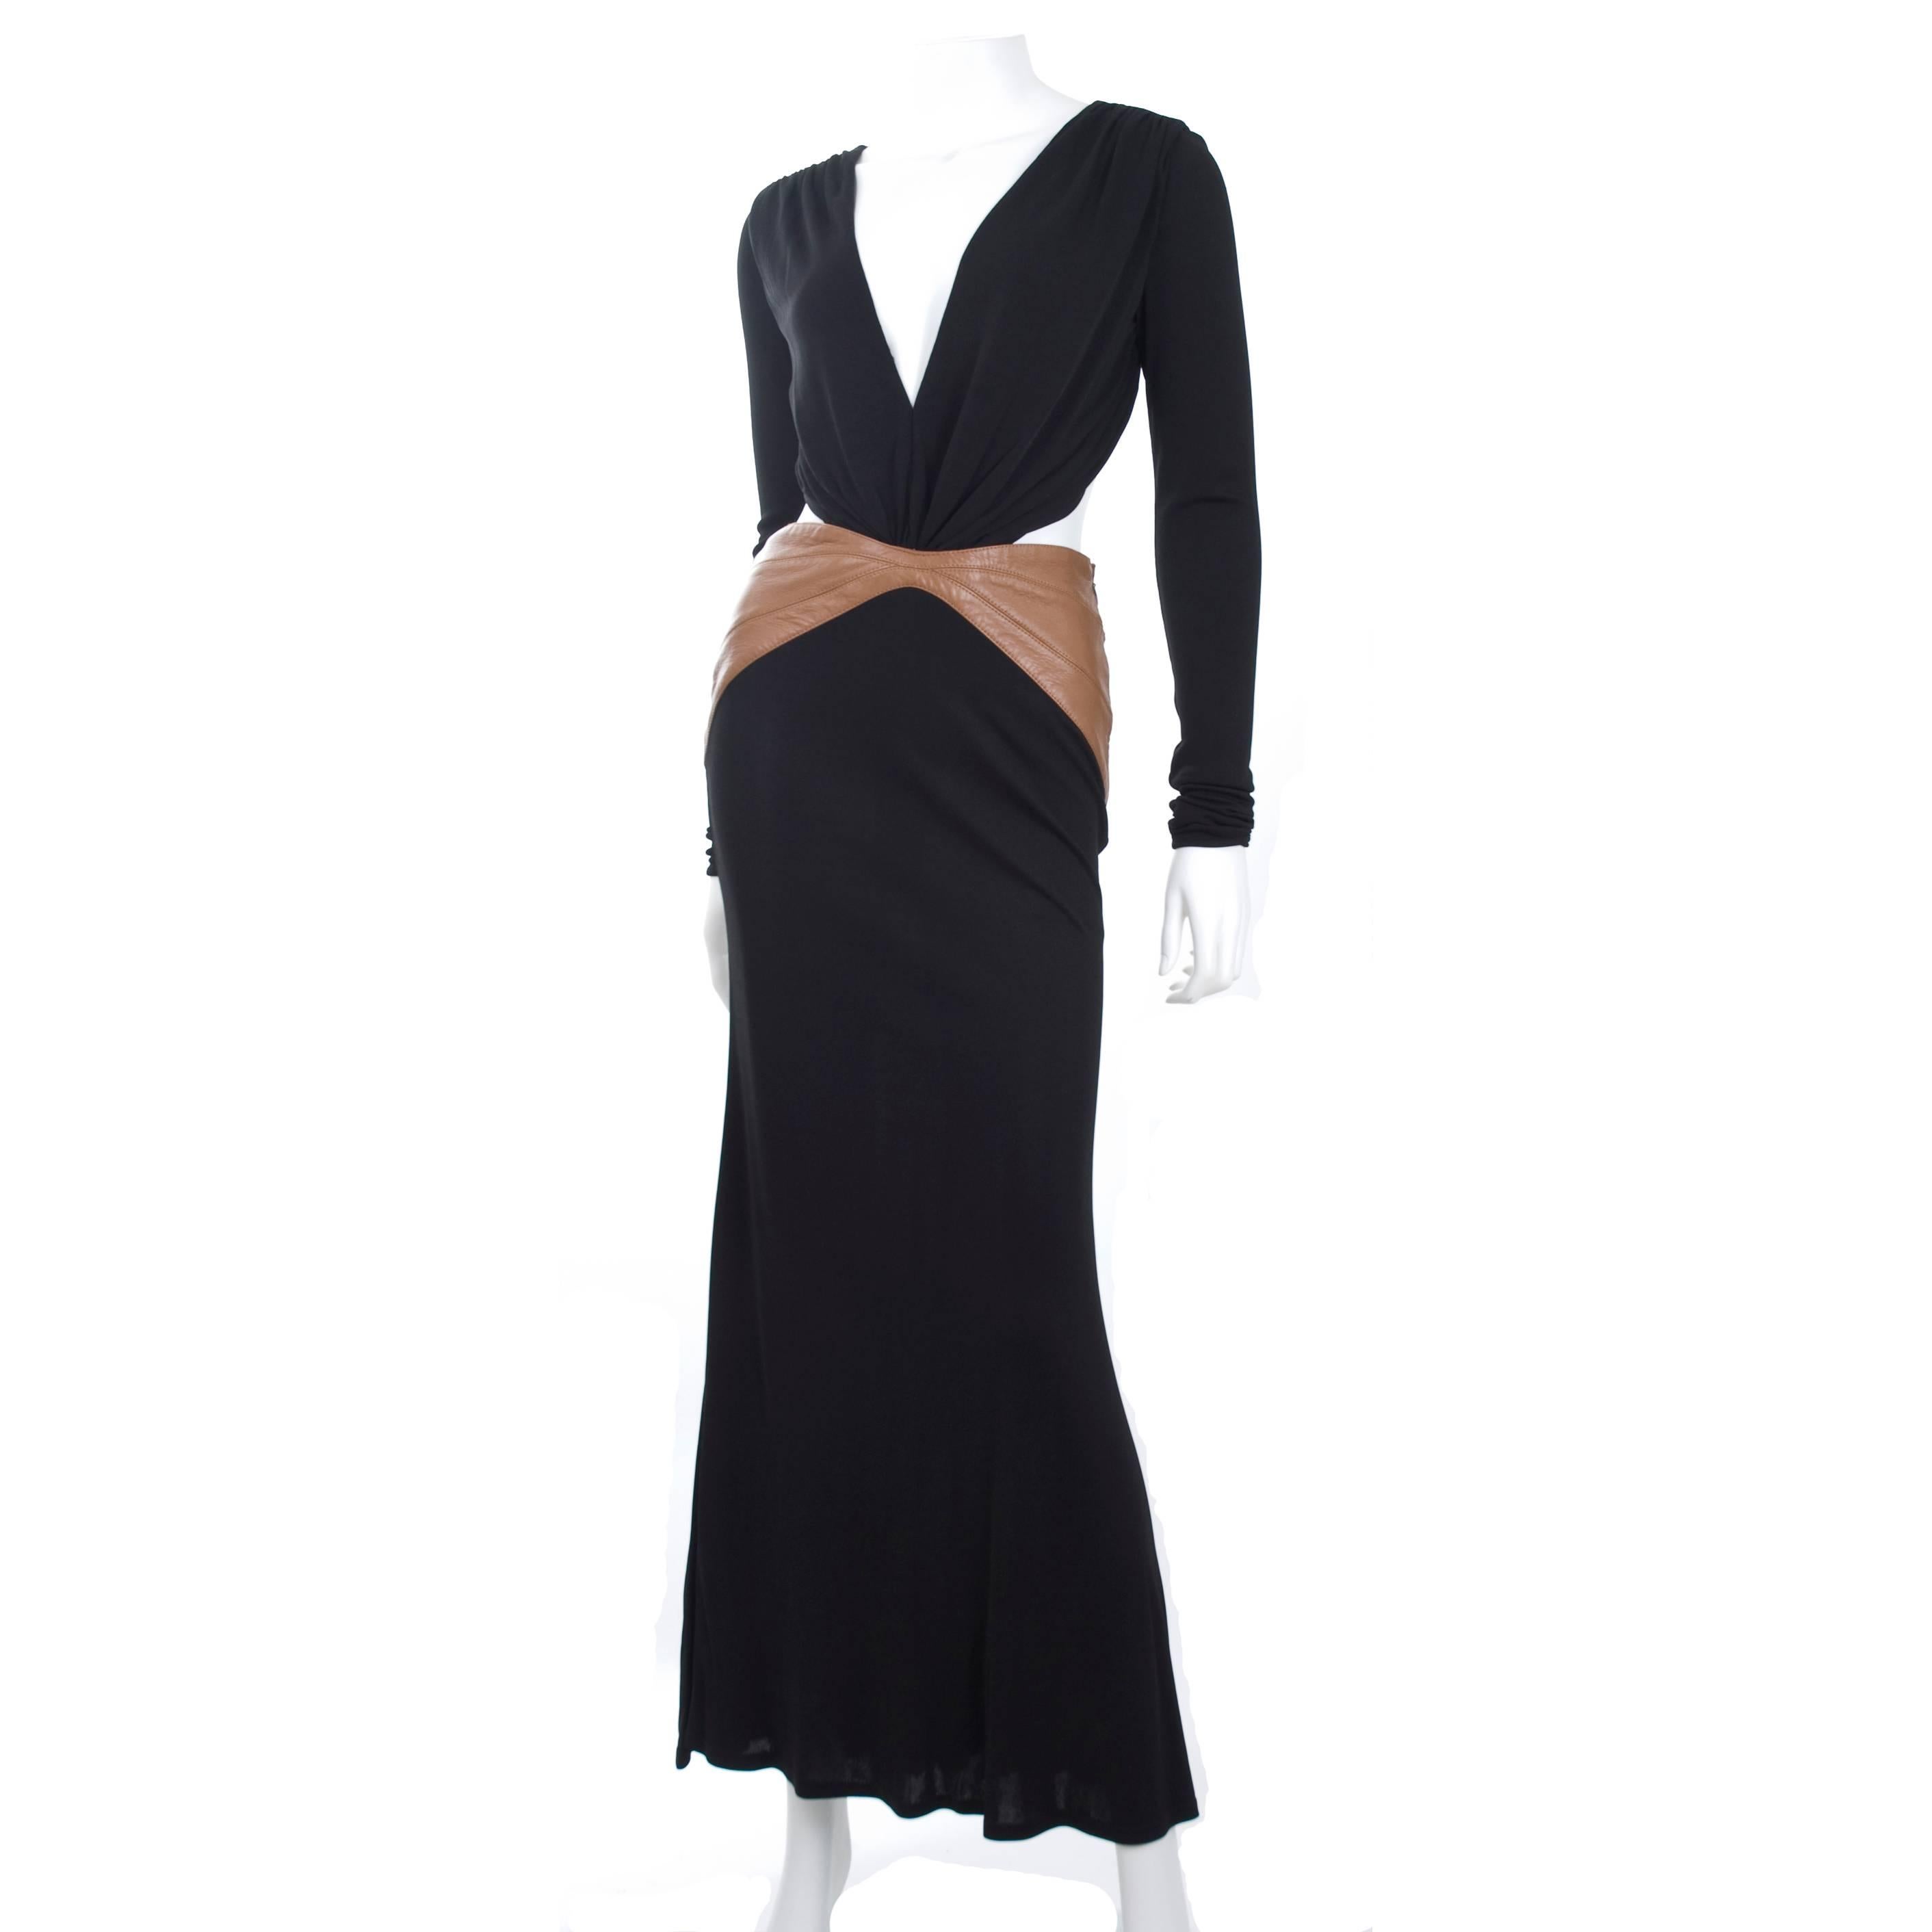 Rare 90s vintage GIANNI VERSACE COUTURE black viskose with tan leather around the hips.
Hook closure in the neck, zipper on the side.
The Dress has been worn and is in very good condition, it has been professional dry cleaned.
Measurements:
Length